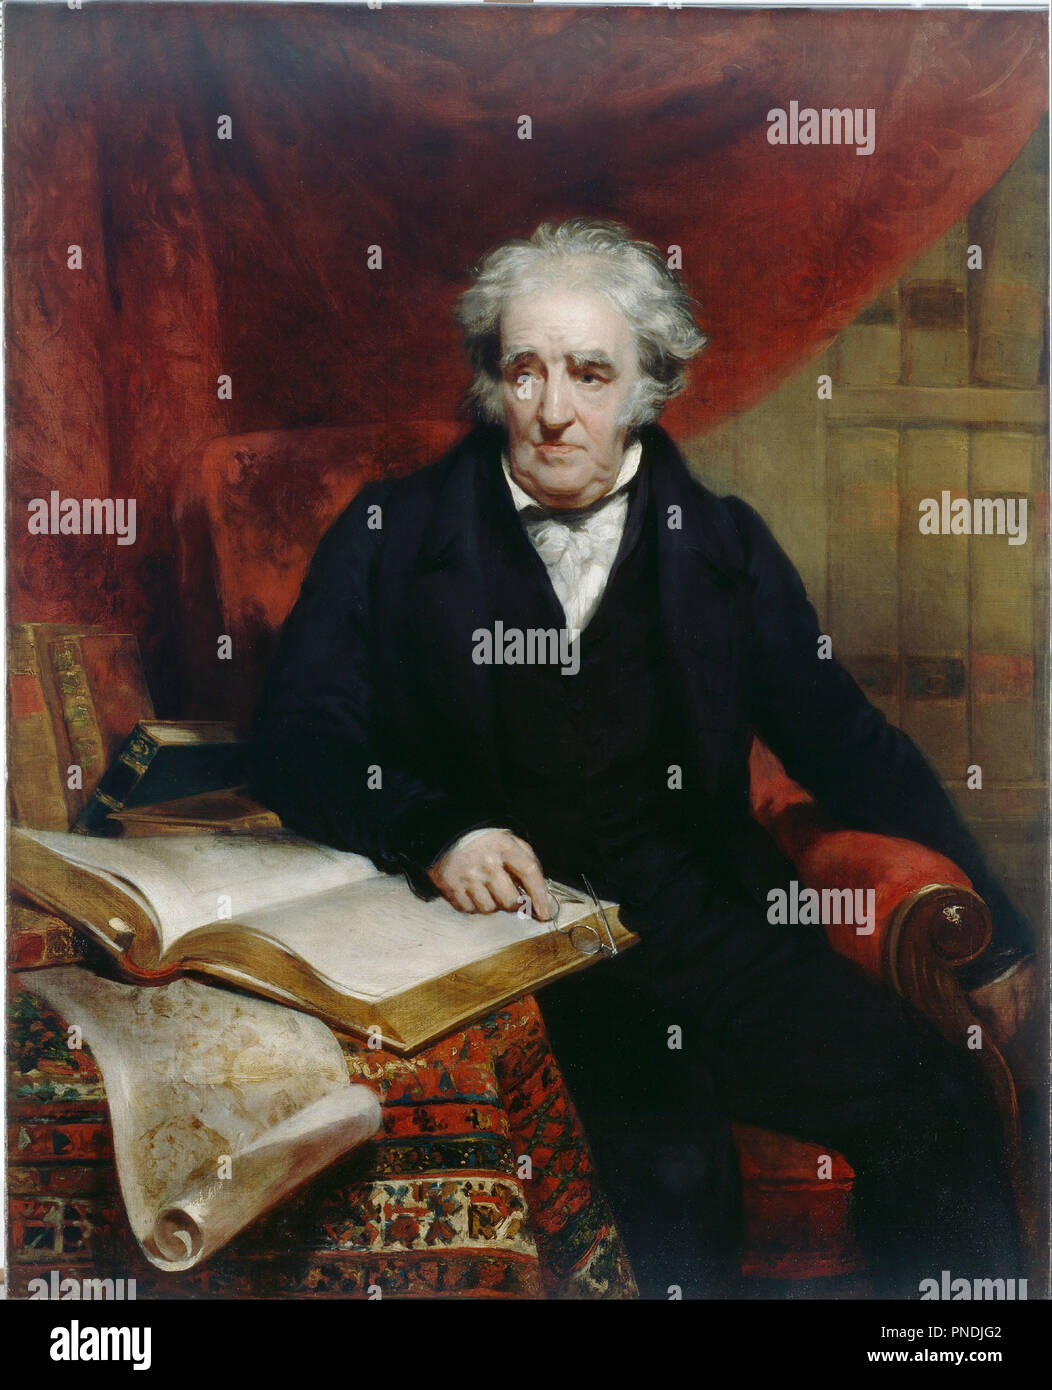 Thomas Stothard. Date/Period: 1833. Painting. Oil on canvas Oil. Height: 1,272 mm (50.07 in); Width: 1,019 mm (40.11 in). Author: WOOD, JOHN. JOHN WOOD (MALER). Stock Photo